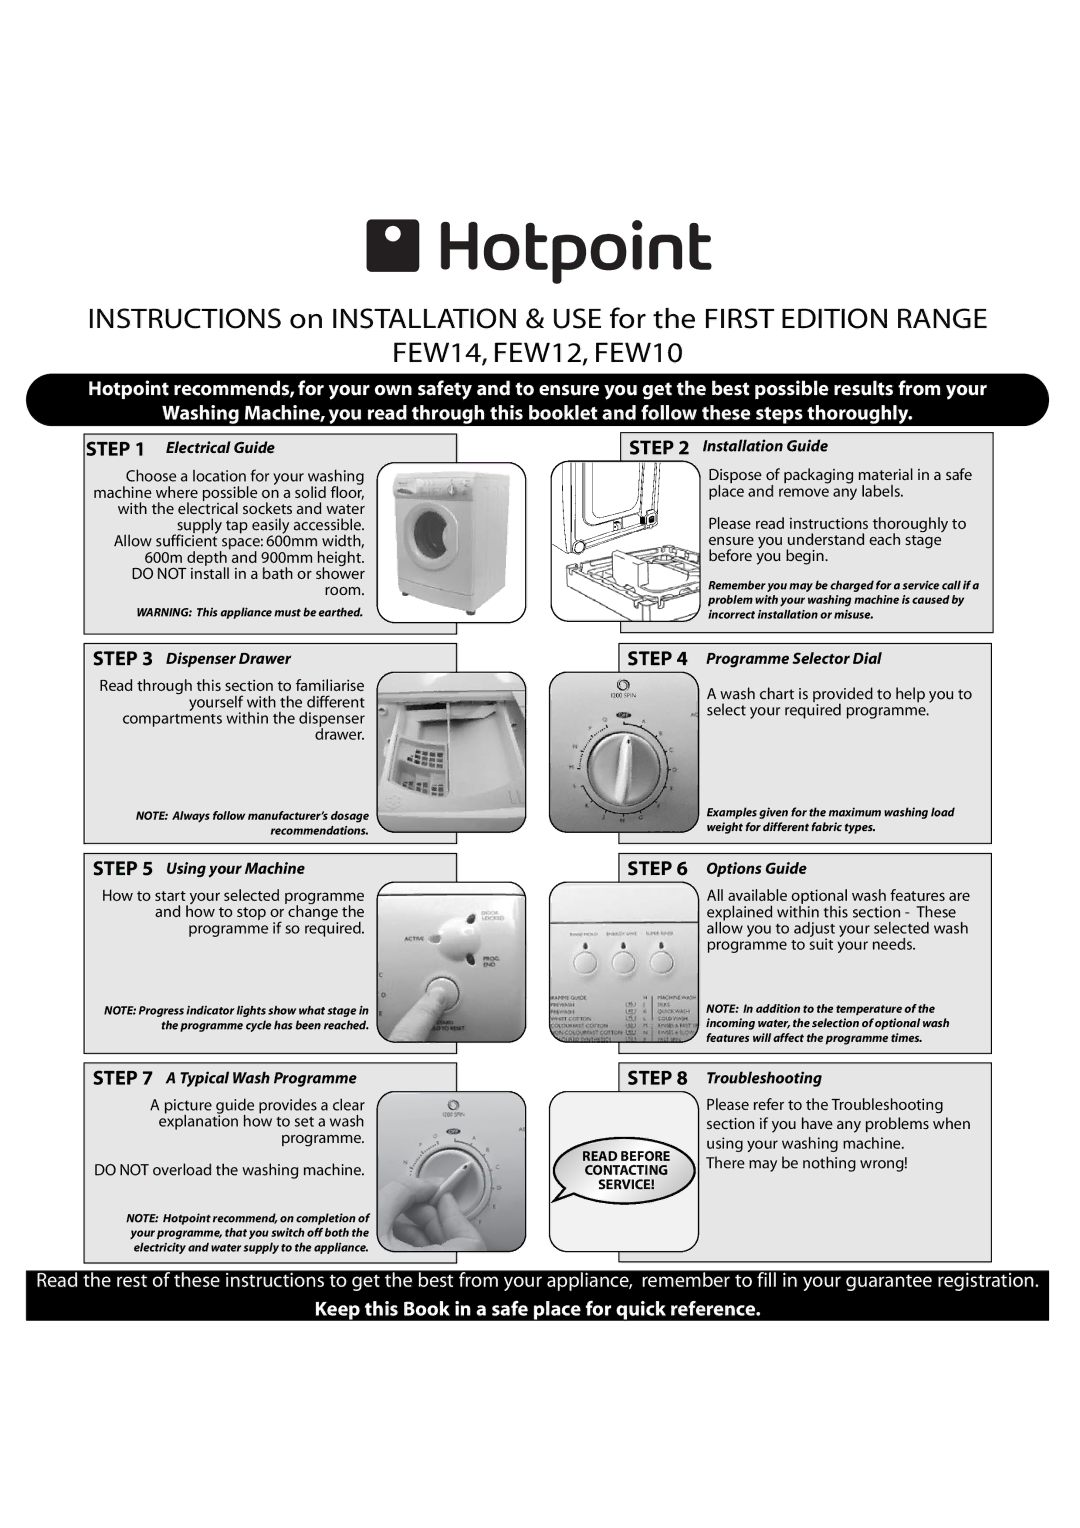 Hotpoint FEW10 manual Electrical Guide, Dispenser Drawer, Installation Guide, Programme Selector Dial, Using your Machine 